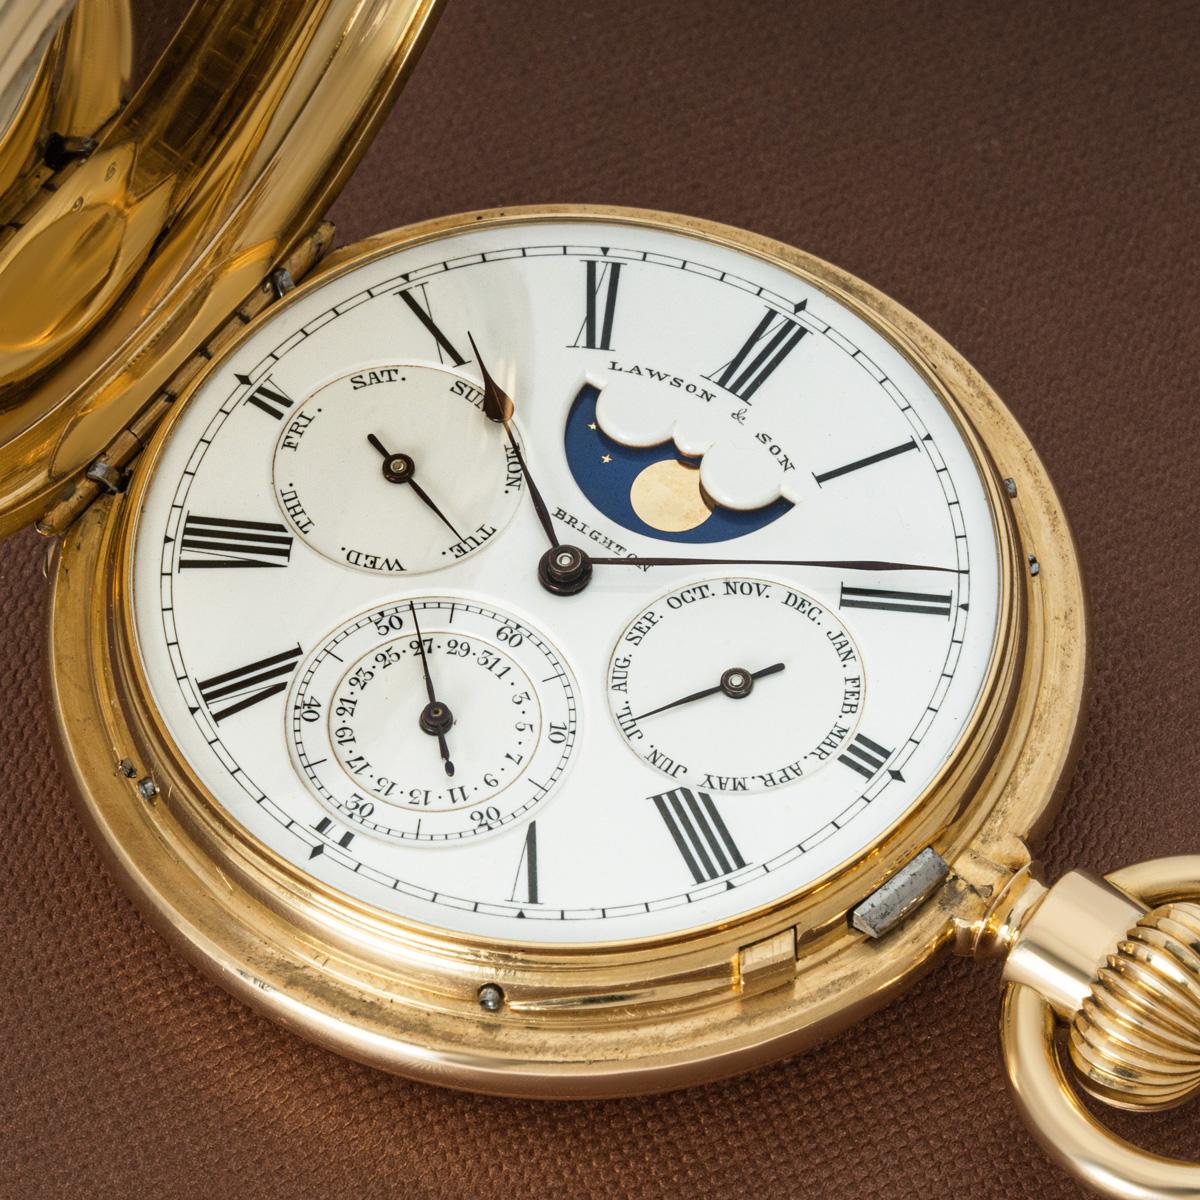 Lawson & Son Brighton. A Rare Full Calendar Heavy 18ct Yellow Gold Hunter Keyless Lever Pocket Watch C1900s.

Dial: The superb white enamel dial with Roman numerals outer minute track signed Lawson & son Brighton. With the moon phase at twelve